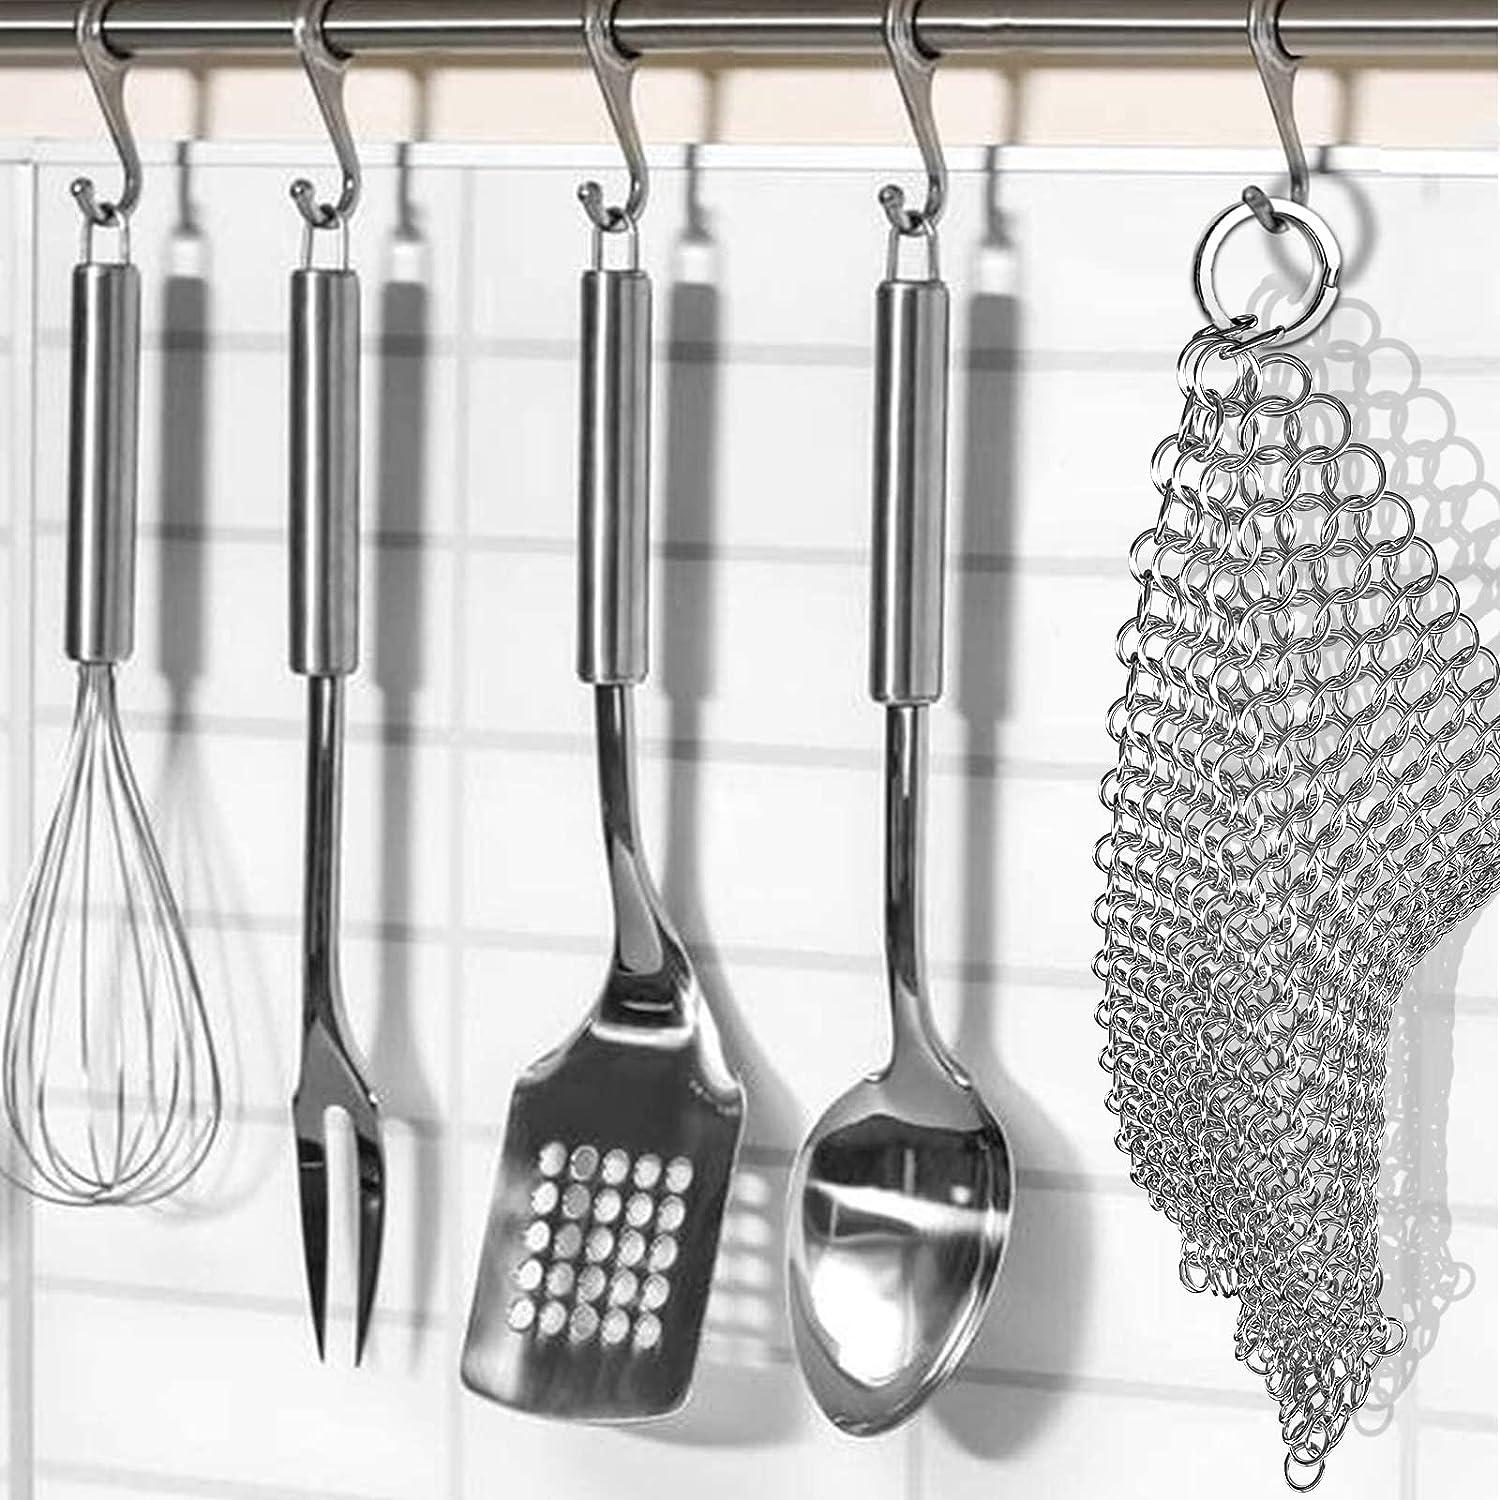  Cast Iron Scrubber 316 Stainless Steel Cast Iron Skillet Cleaner  8x6 Chainmail Scrubber Scraper Chain Mail Link Scrub for Cast Iron  Pre-Seasoned Pans, Griddles, BBQ Grills, and Pot Cookware Cleaning 